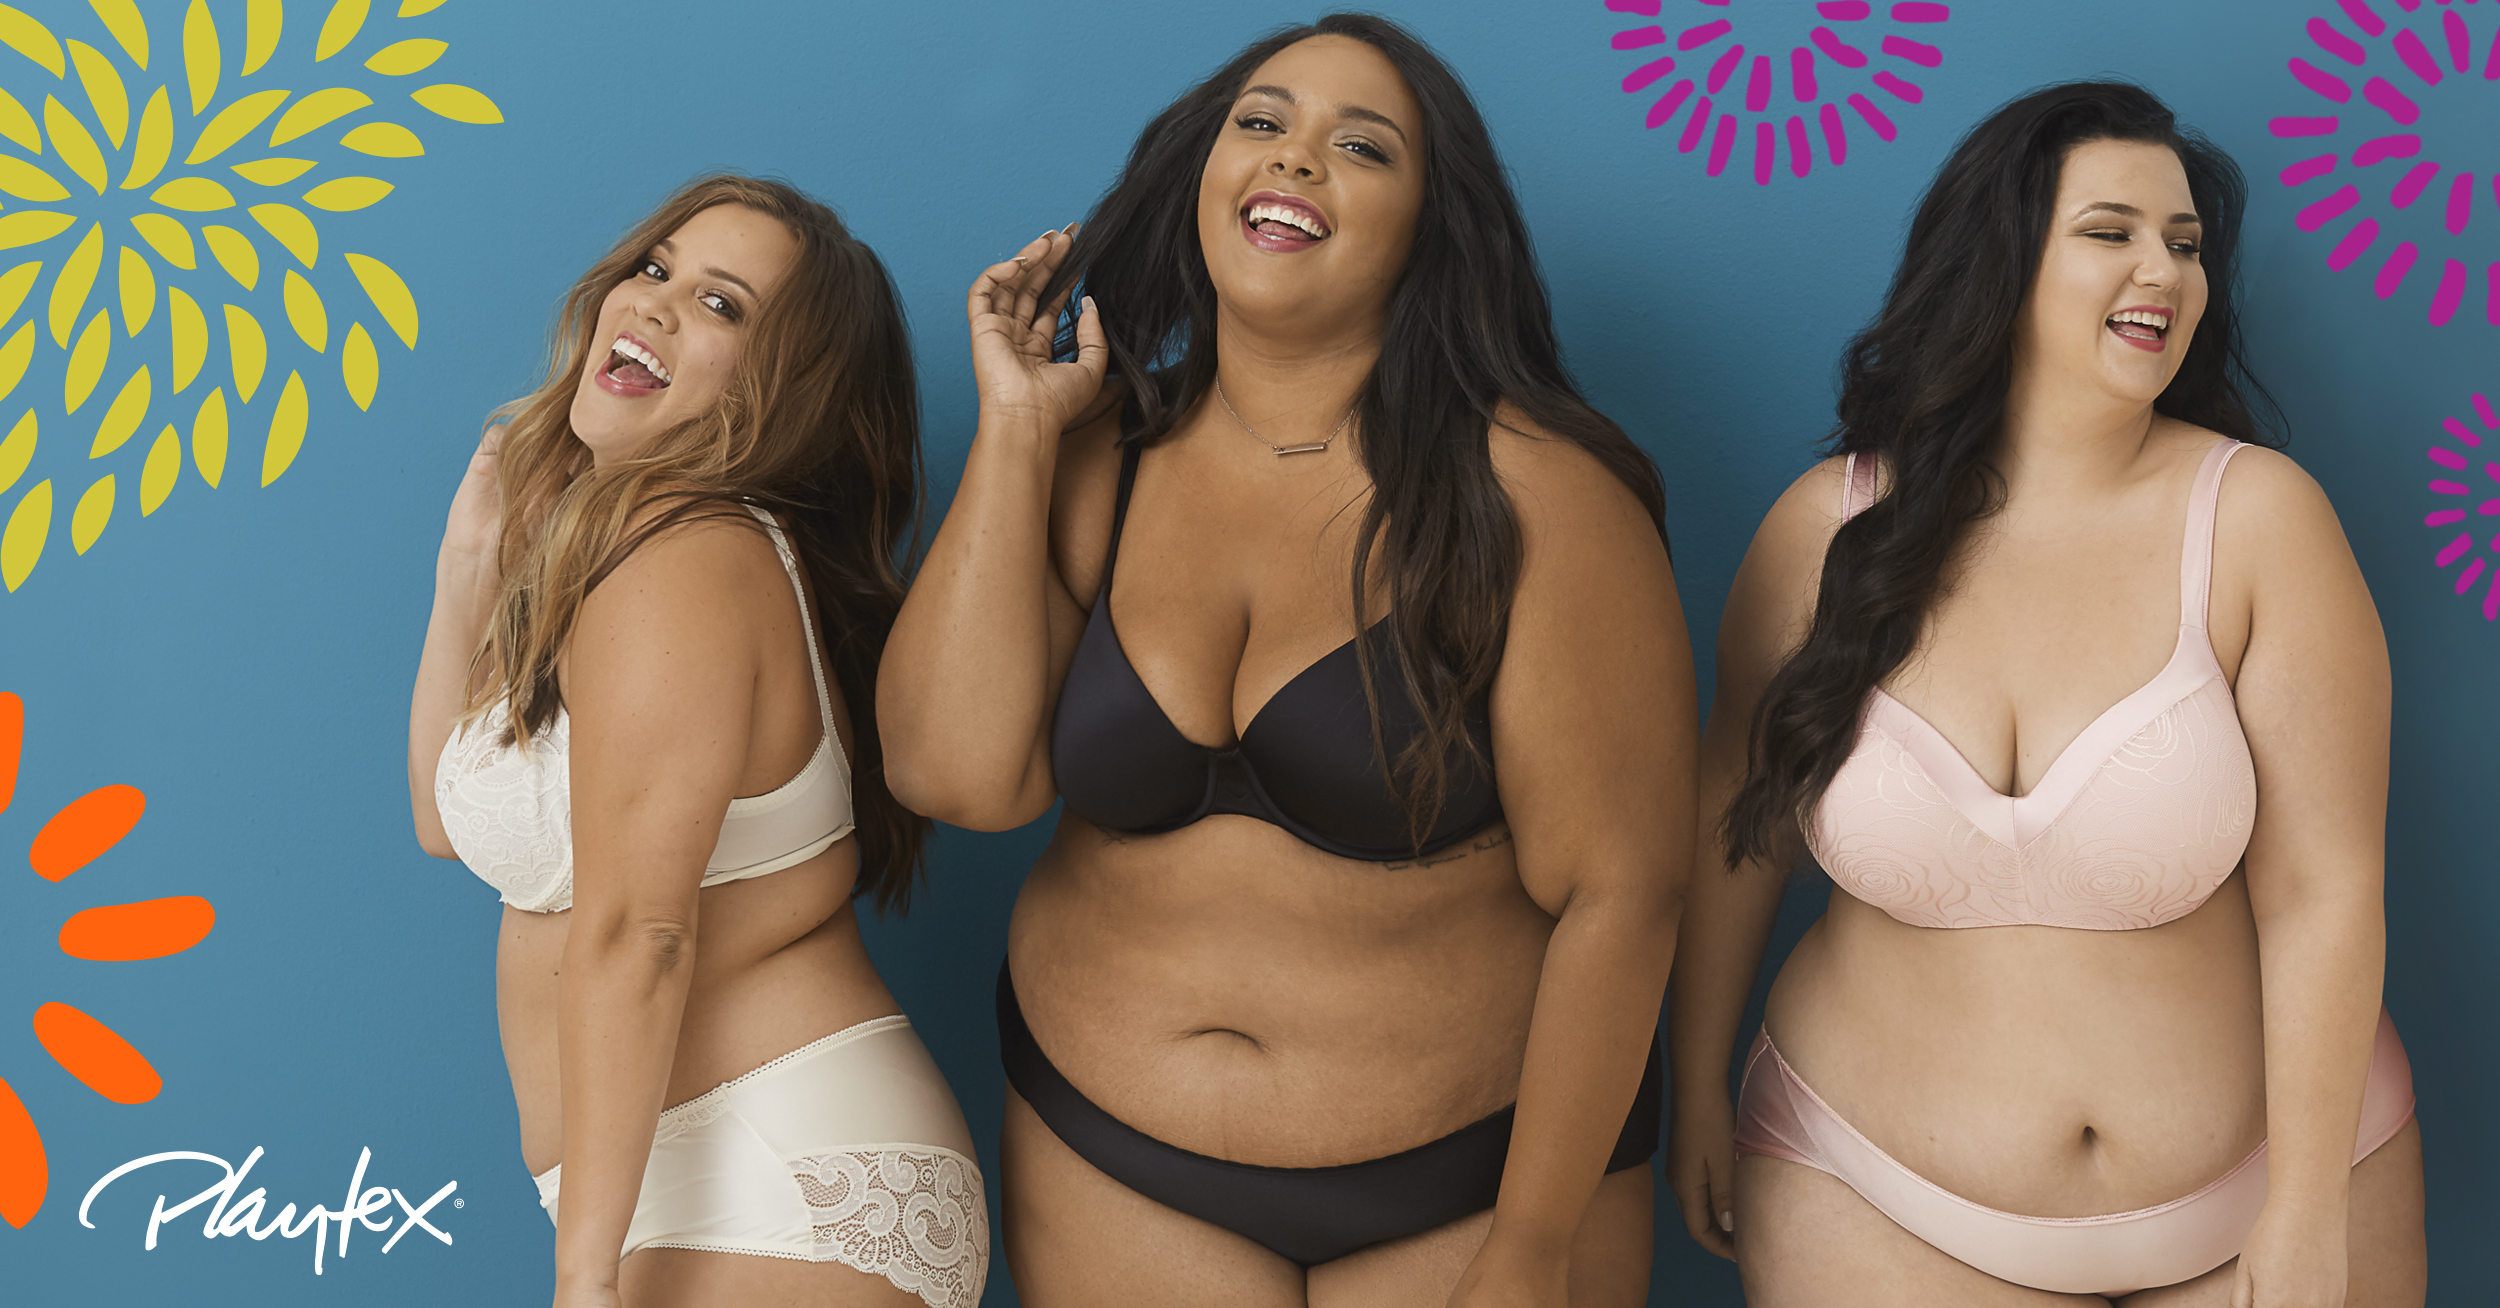 Curvy is the New Full Figure: Body Positive Millennials Driving